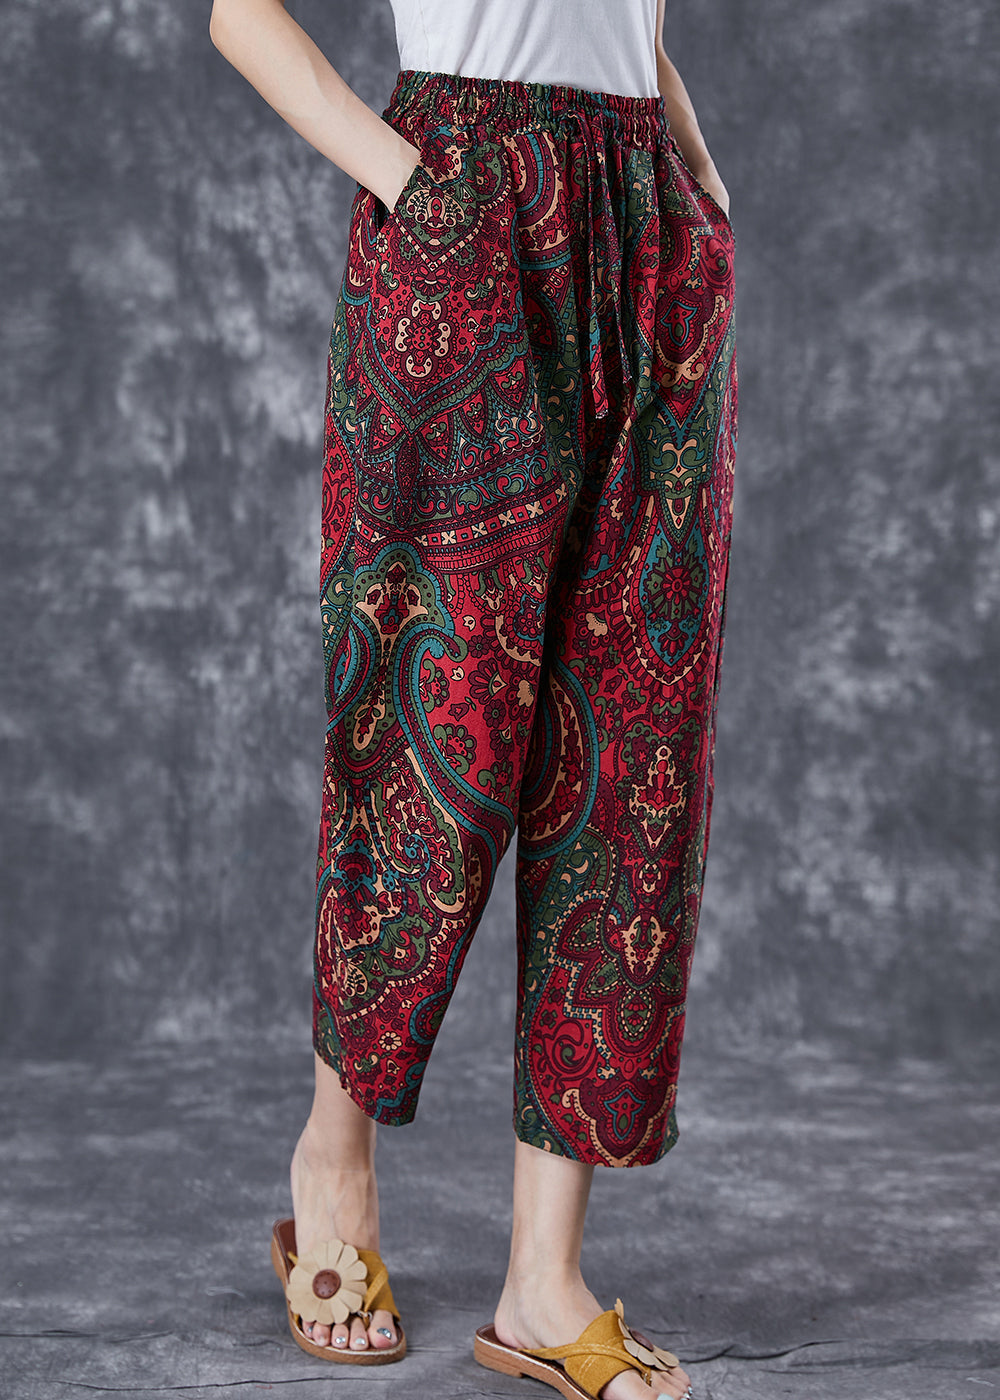 Casual Red Oversized Pockets Print Linen Pants Trousers Summer LY7042 - fabuloryshop